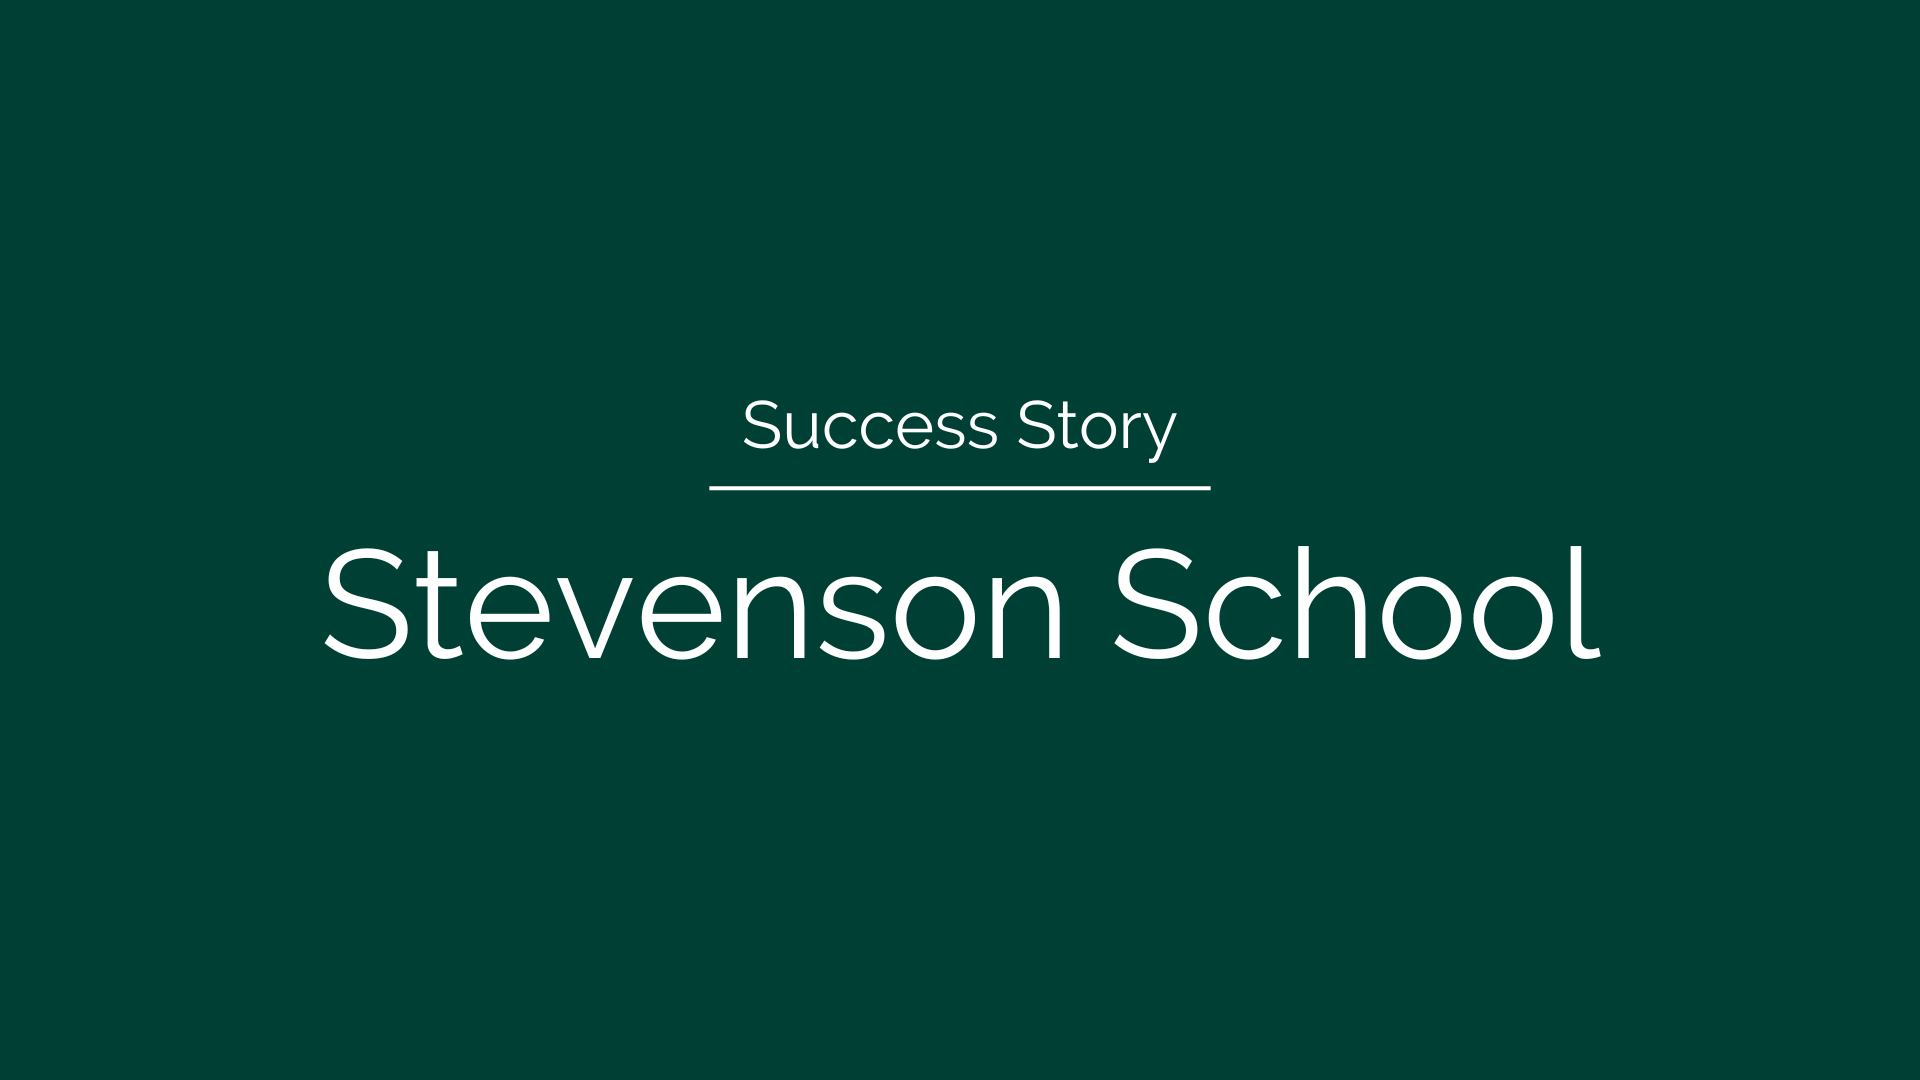 Stevenson School Manages Admissions, Student Success, and Advancement All in a Single Slate Database